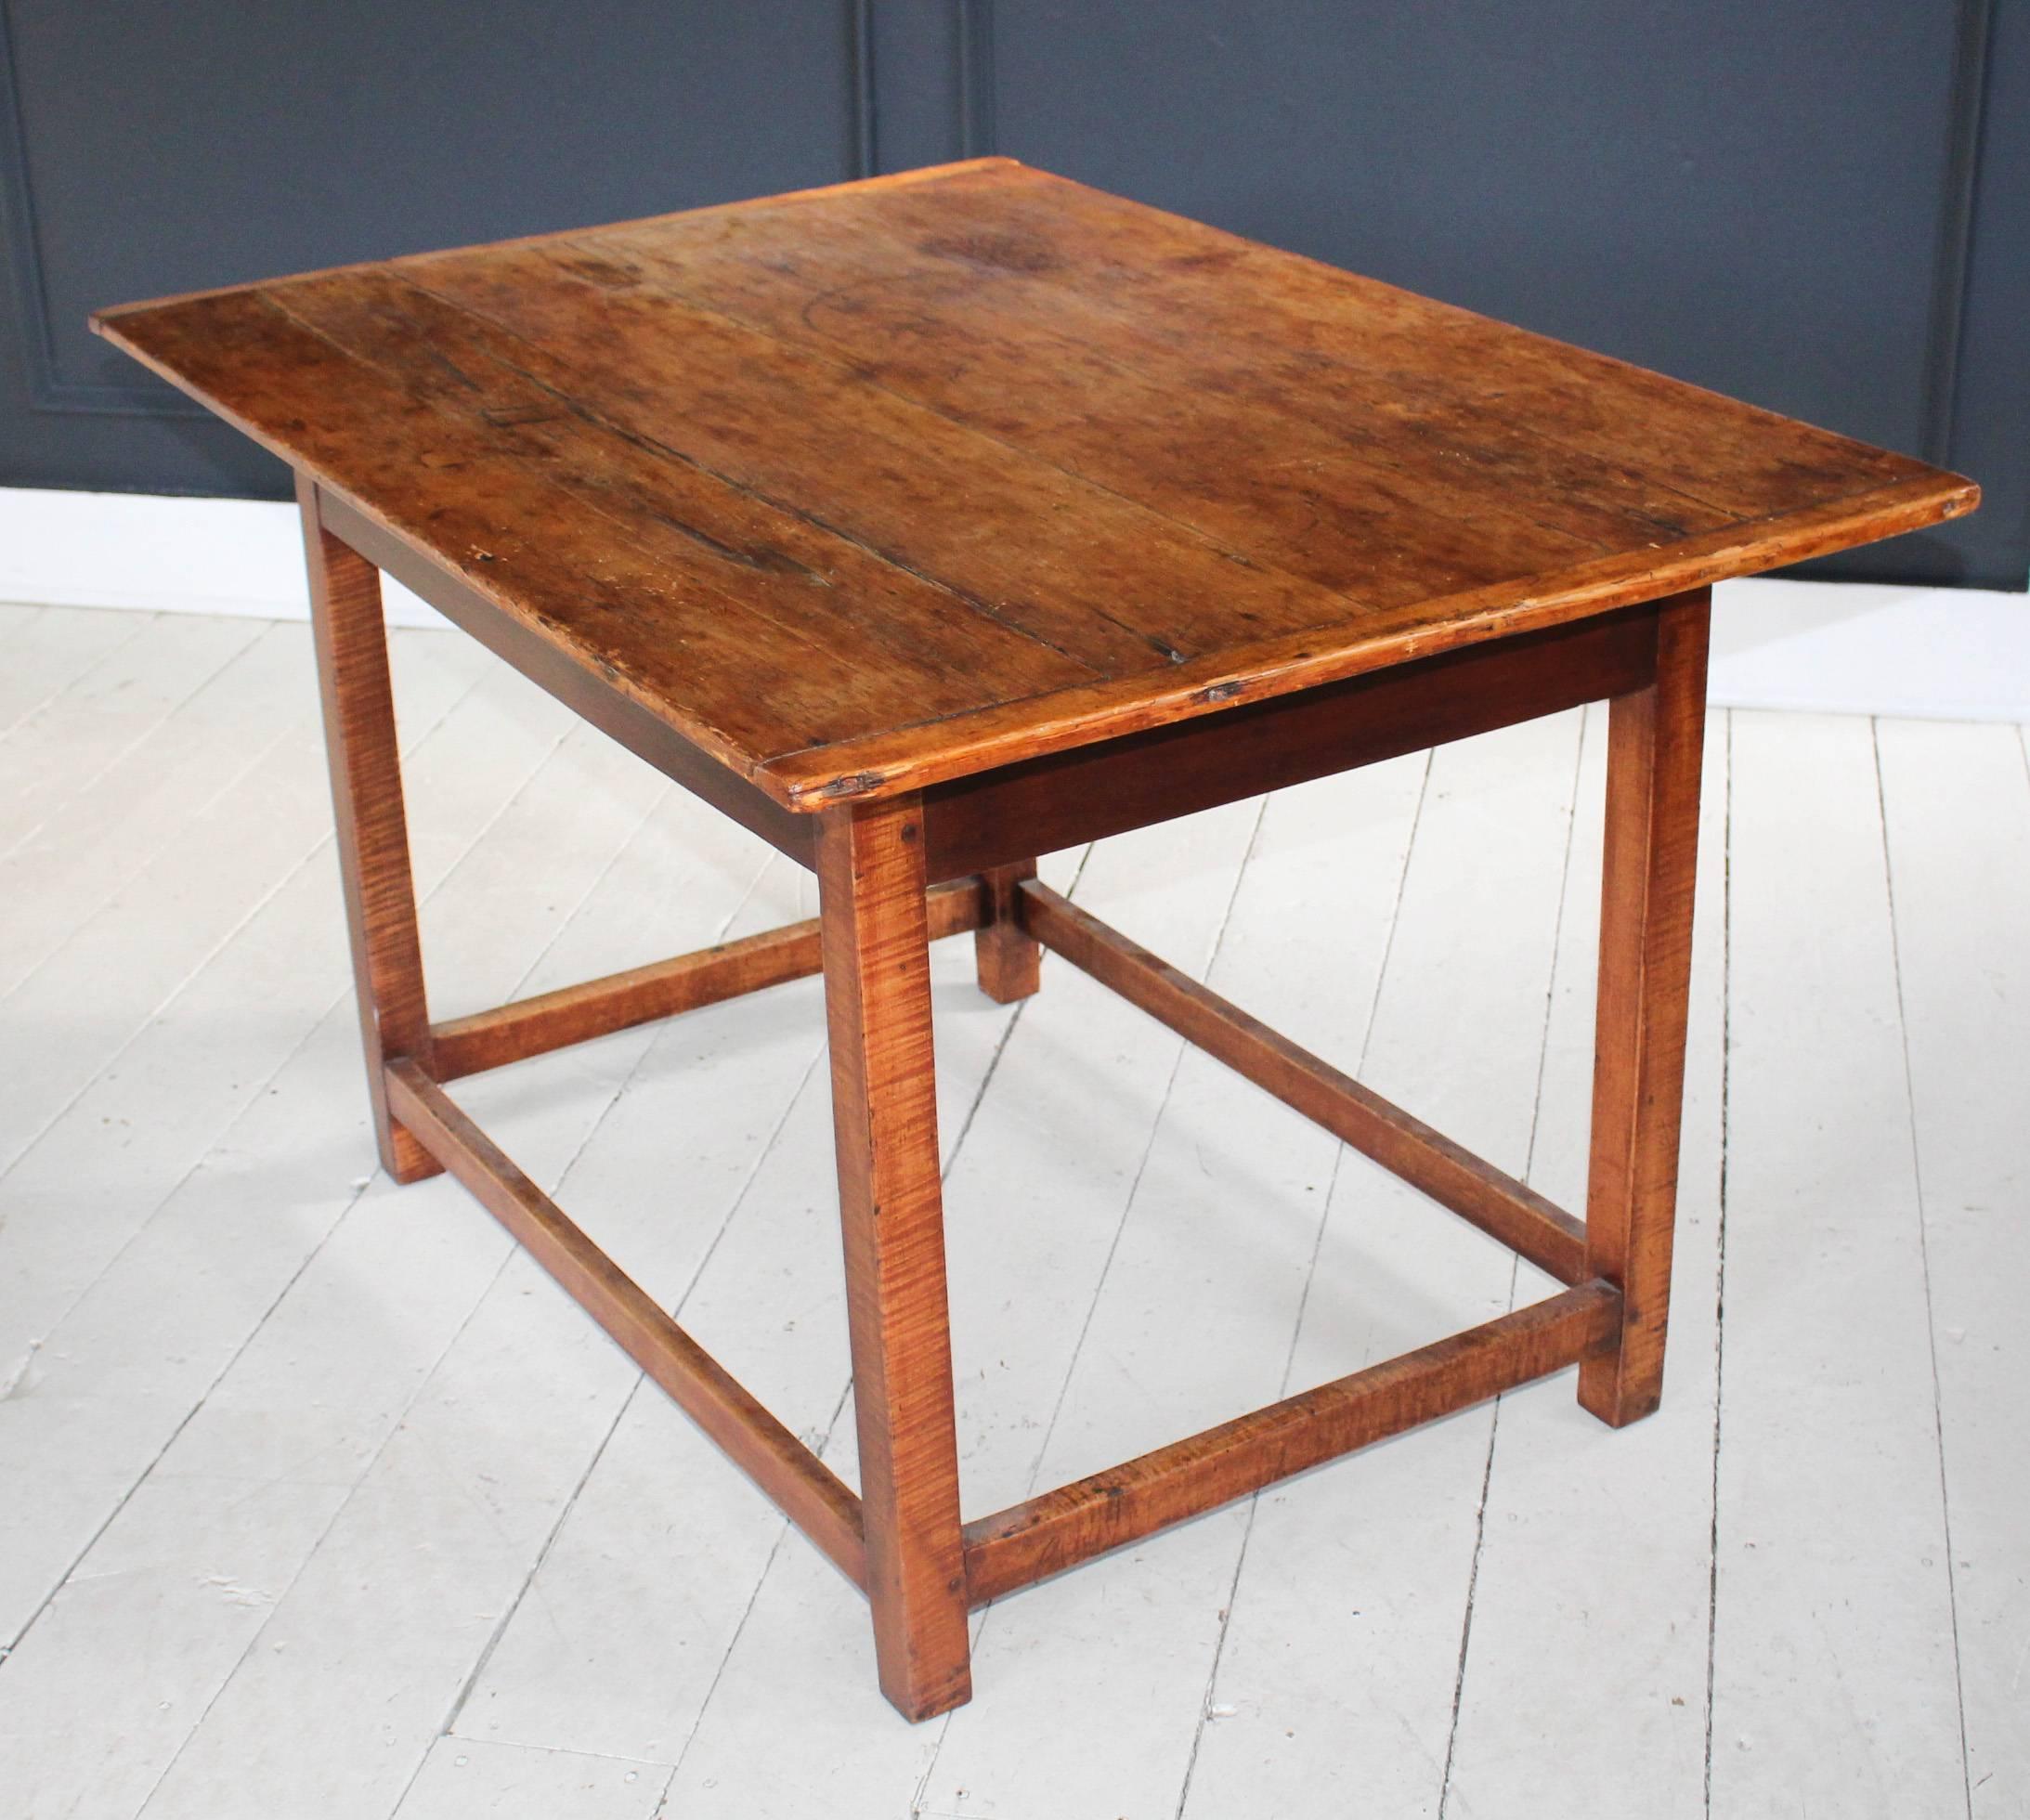 White pine two-board table, 18th century Pennsylvania, with bread board ends and stretcher base.